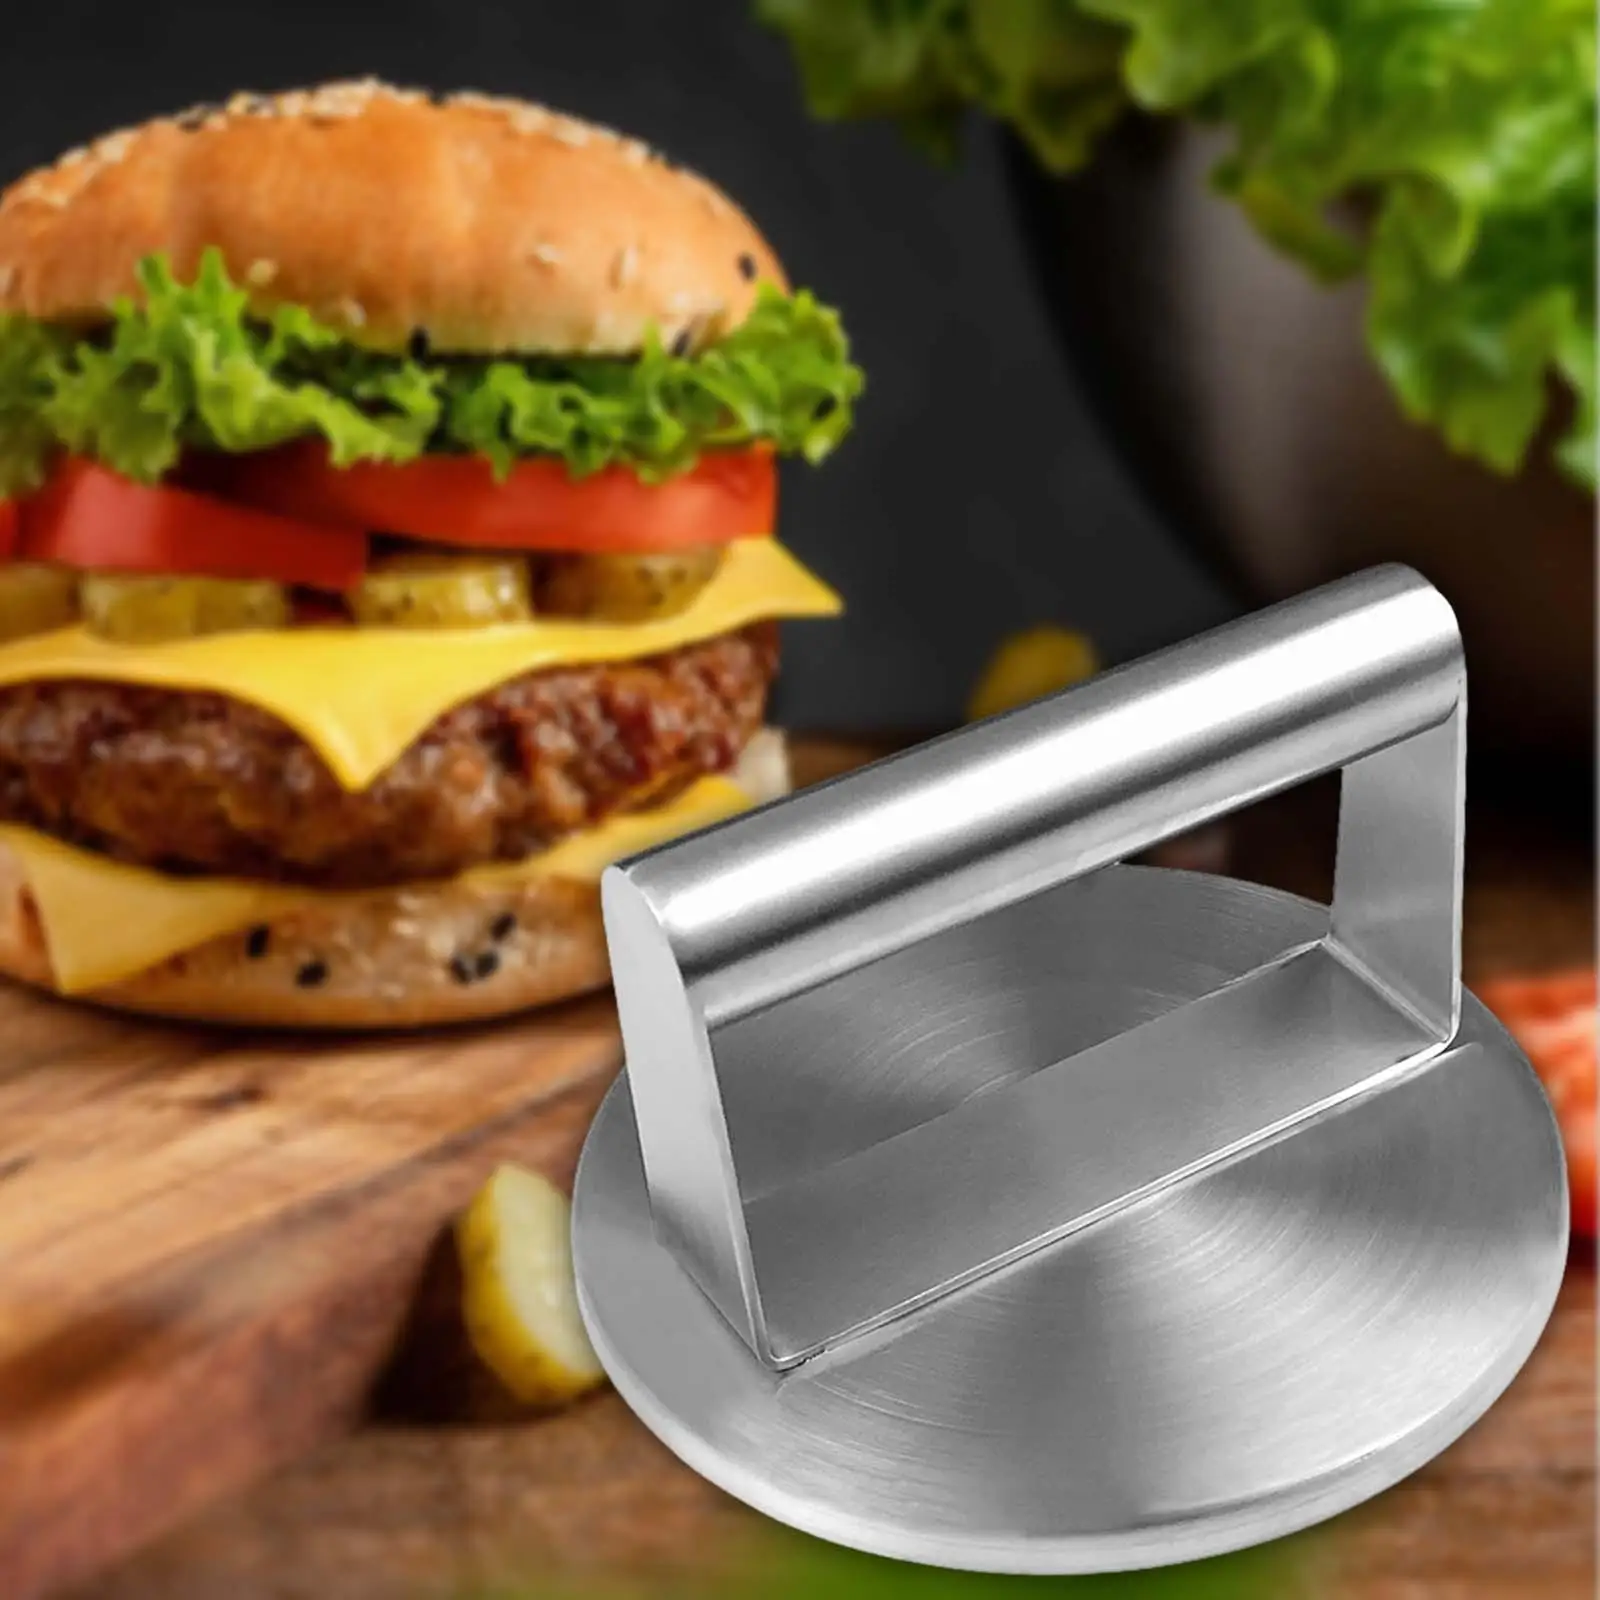 5.94inch Round Burger Presses Beef Meatballs Maker Hamburger Patty Maker for Cooking BBQ Griddle Accessories Grilling Tool